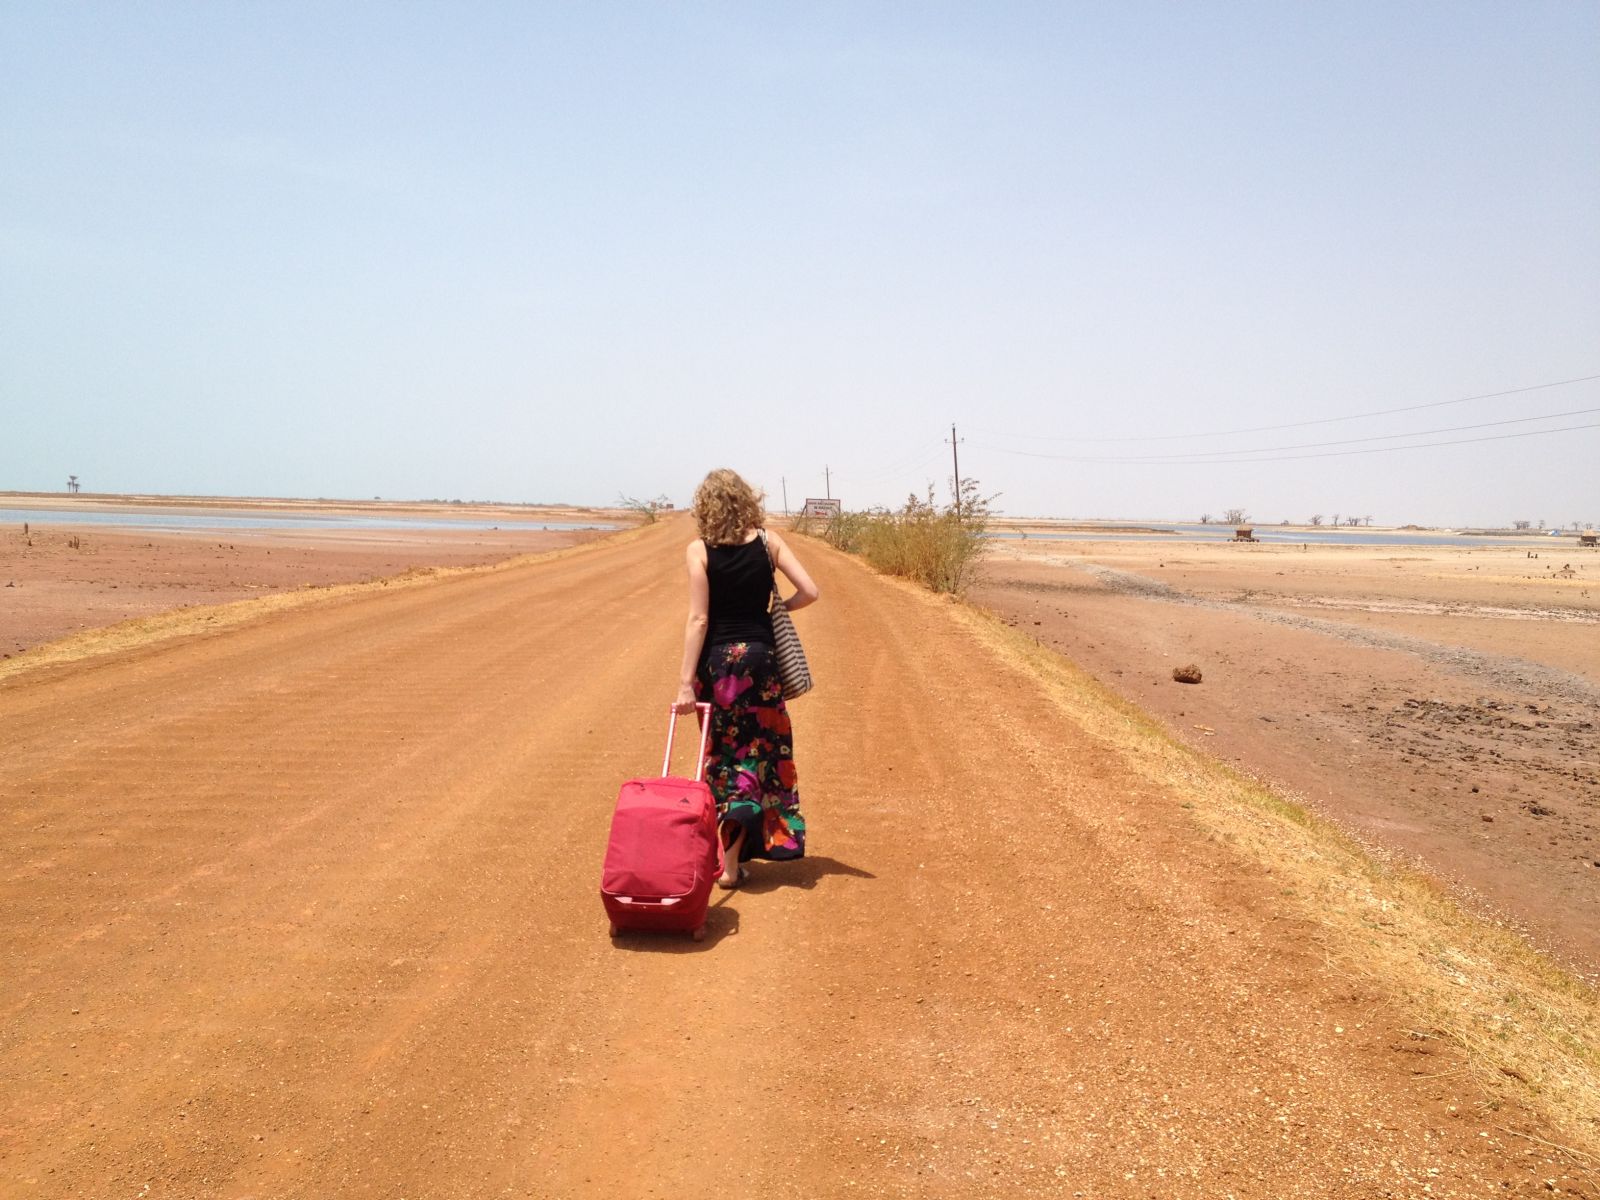 Girl dragging luggage on dusty road in Senegal, Africa.